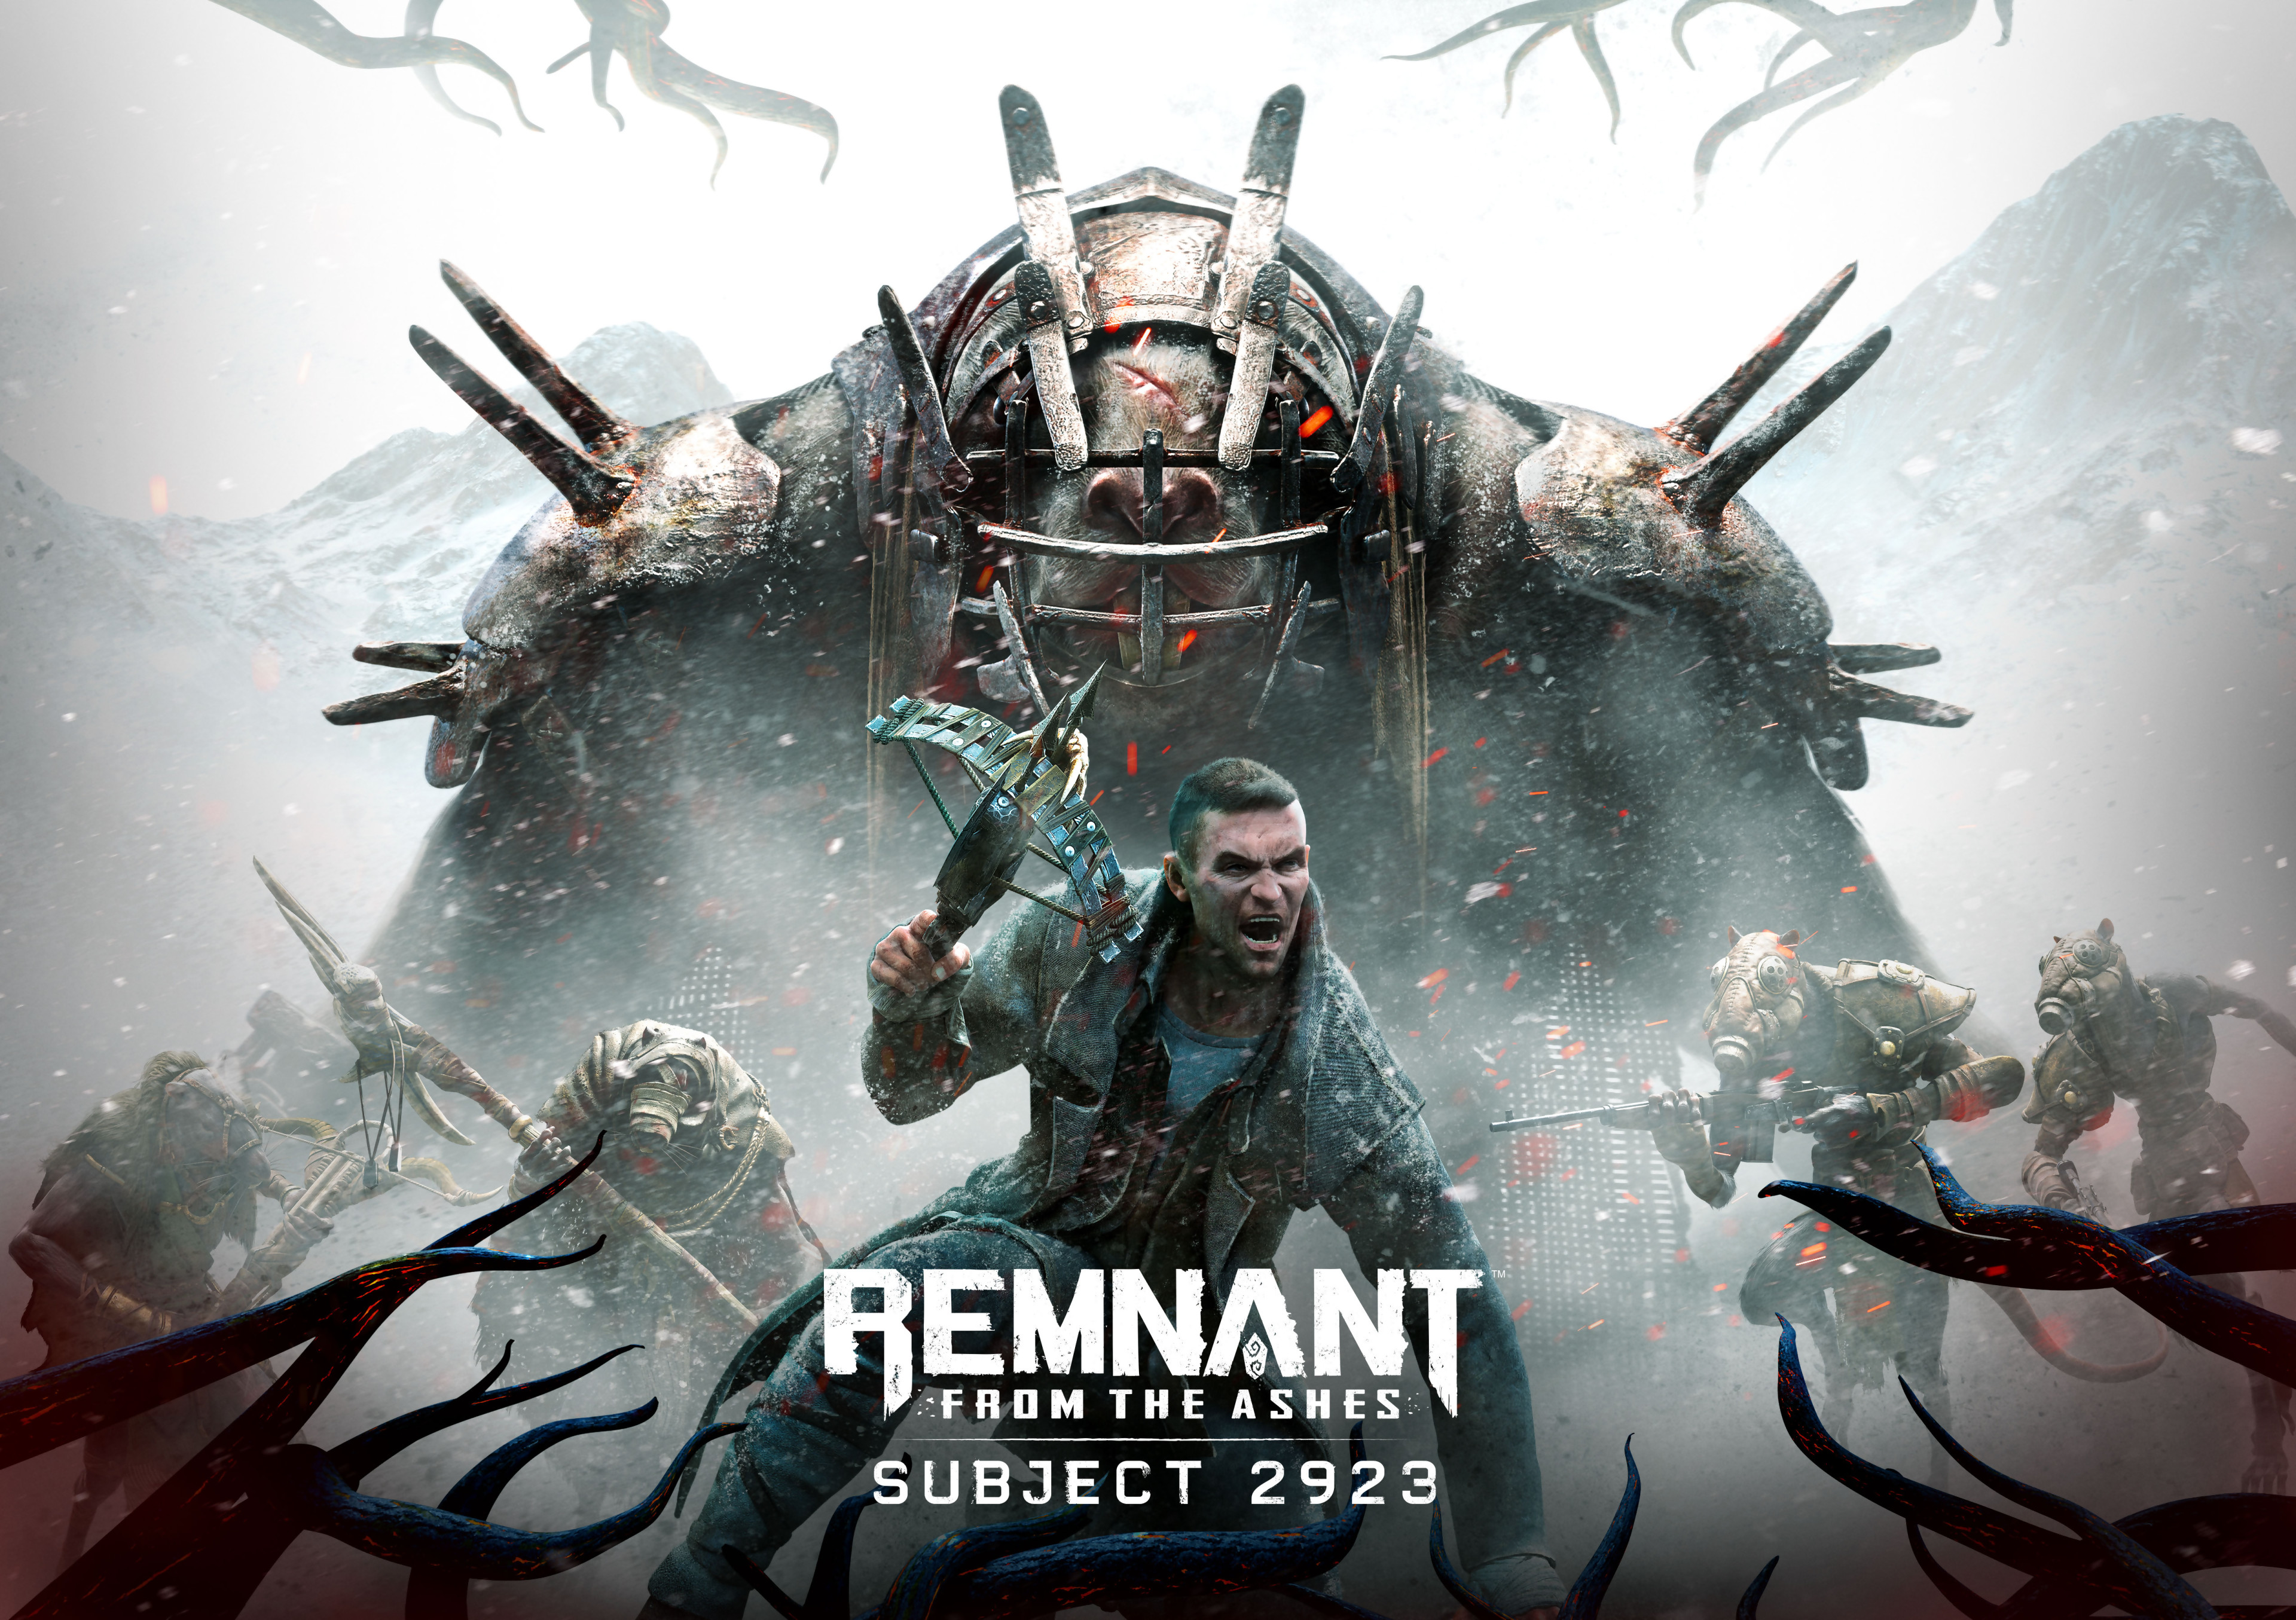 remnant from the ashes release date